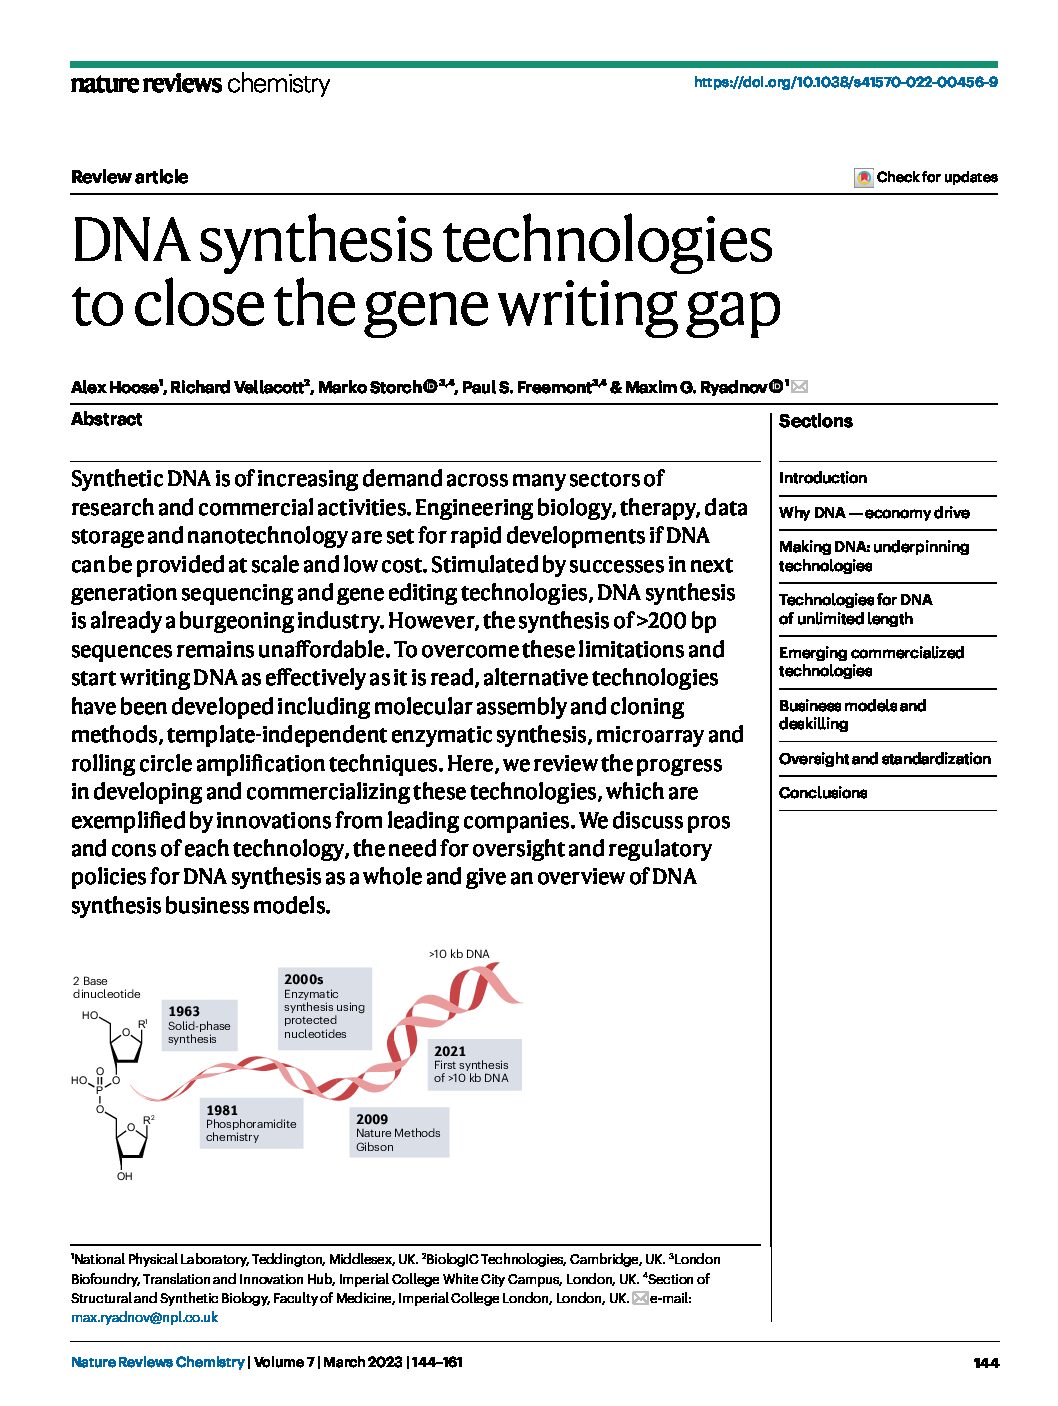 DNA synthesis technologies to close the gene writing gap